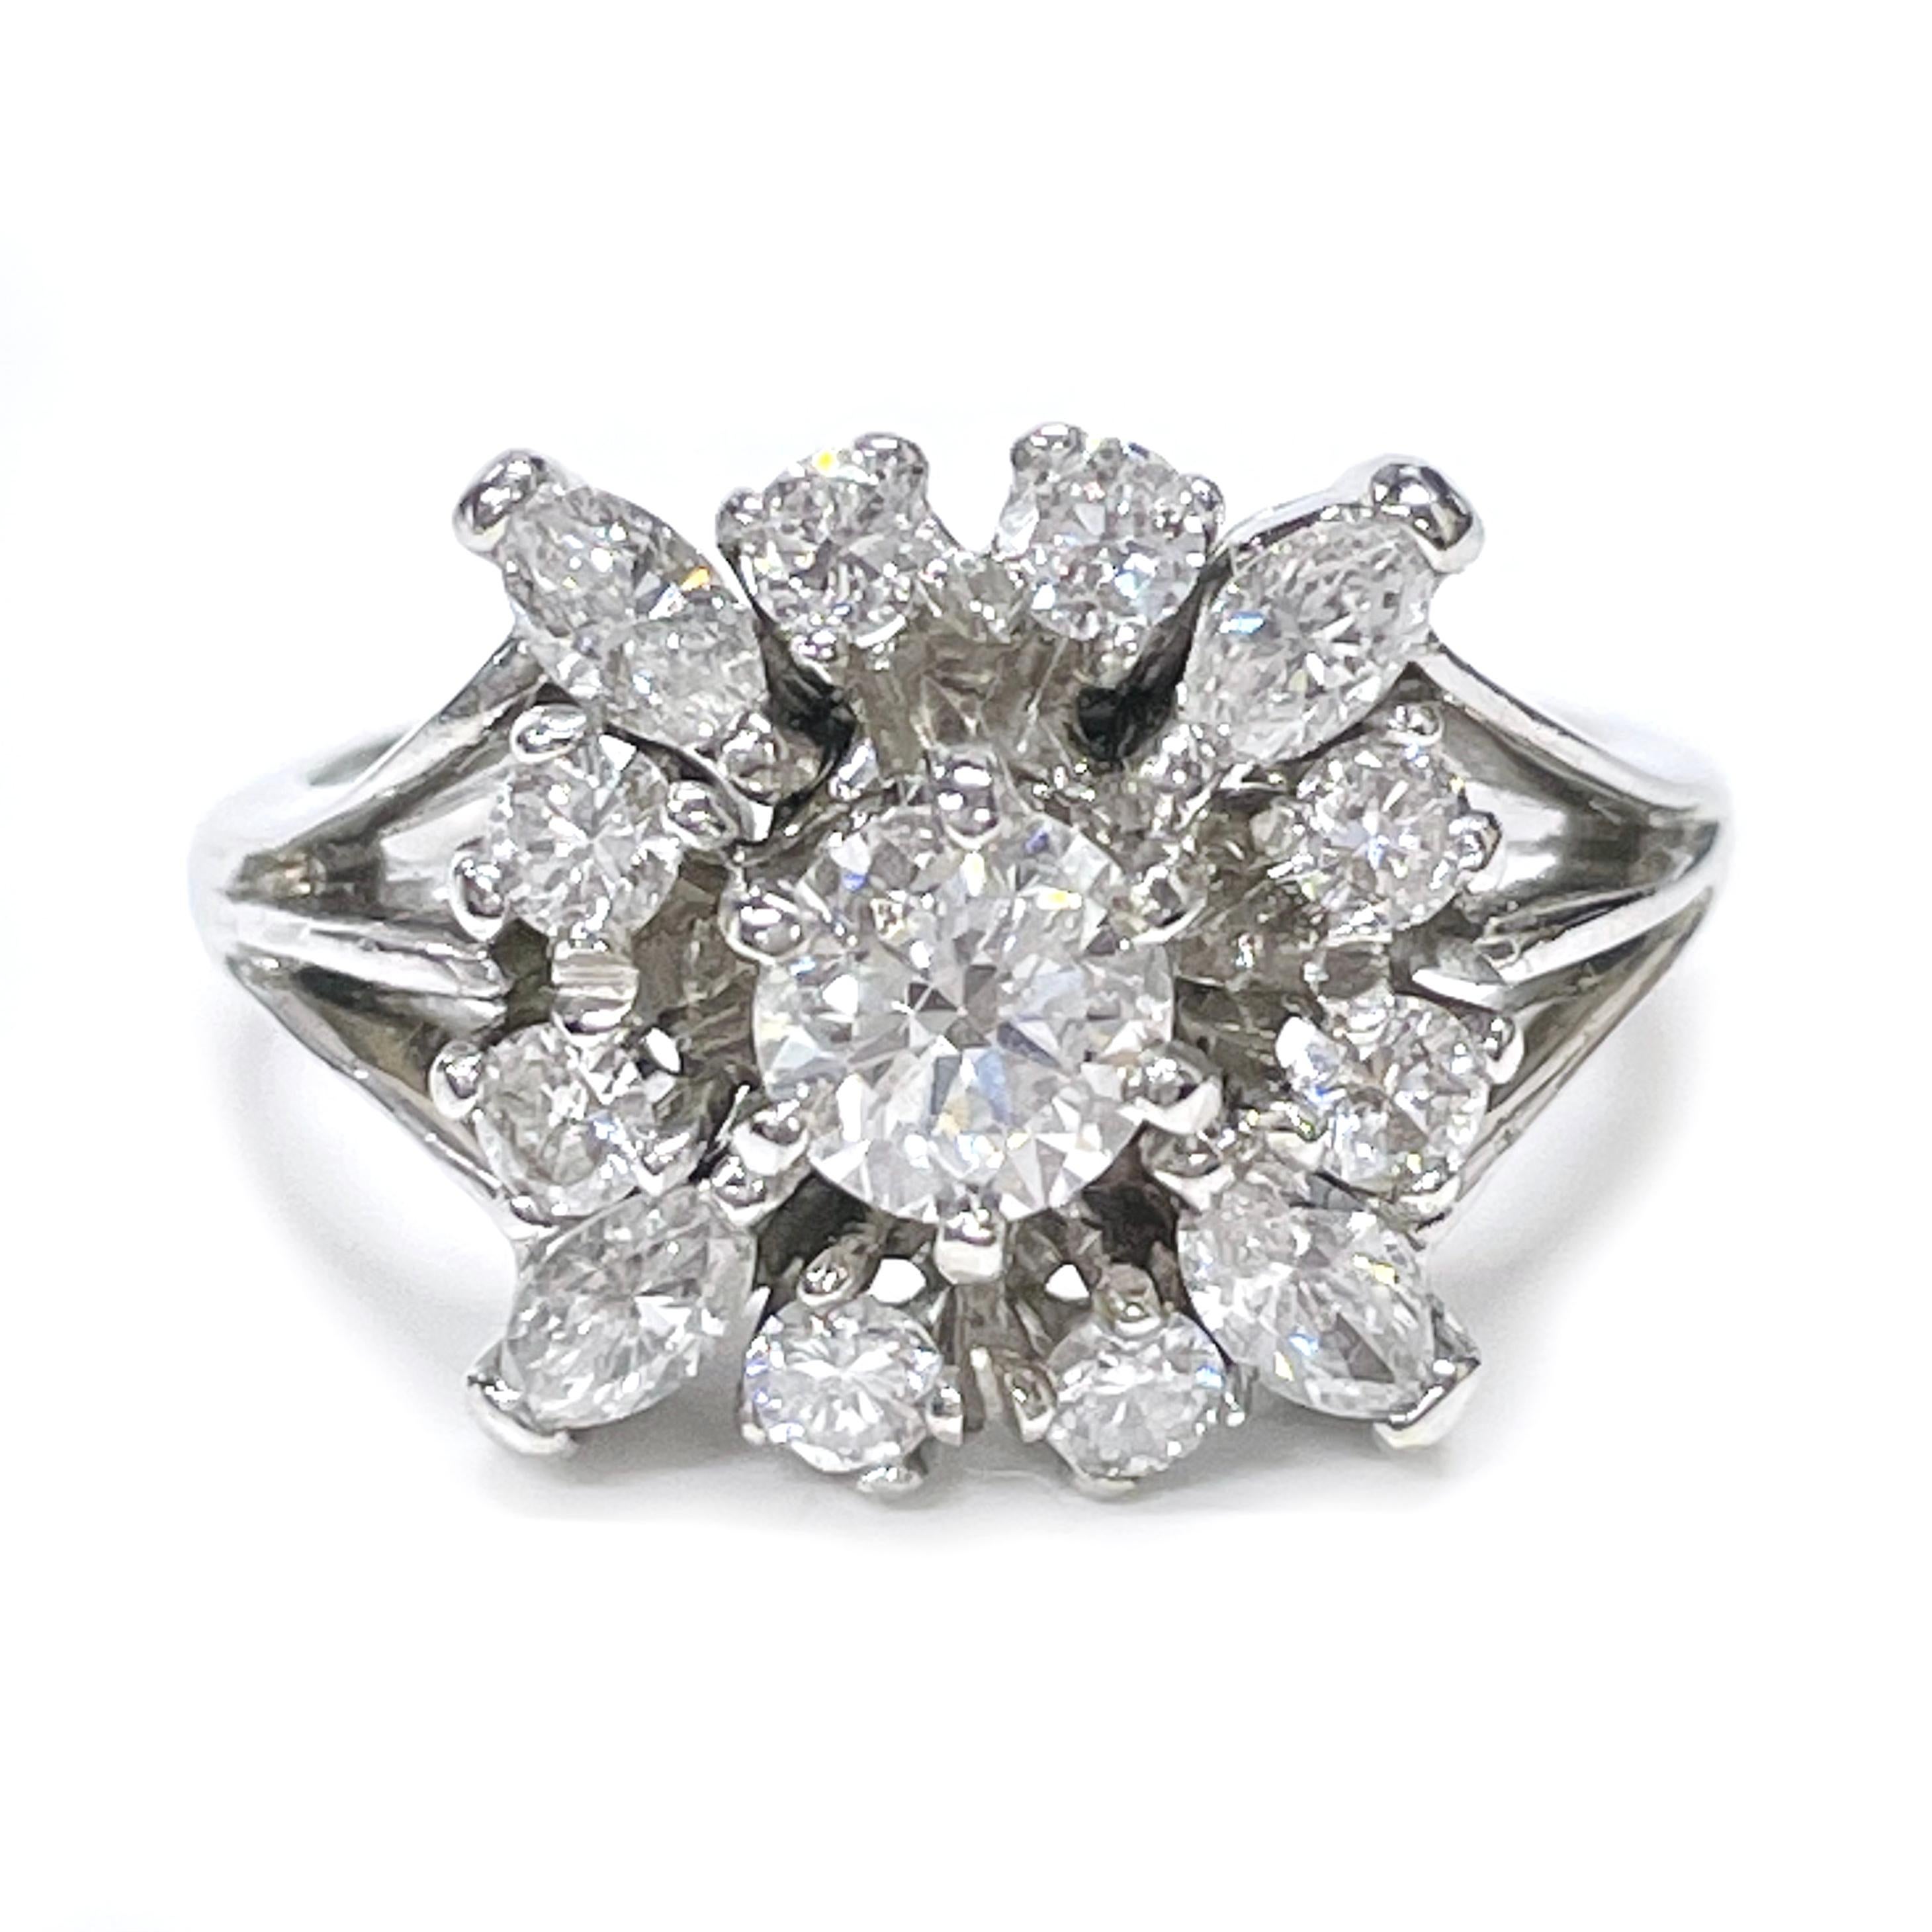 14 Karat White Gold Marquise and Round Diamond Ring. The center diamond is surrounded by two round diamonds on each side for a total of eight and a Marquise diamond at each corner for a total of four, all thirteen diamonds are prong set. Diamonds